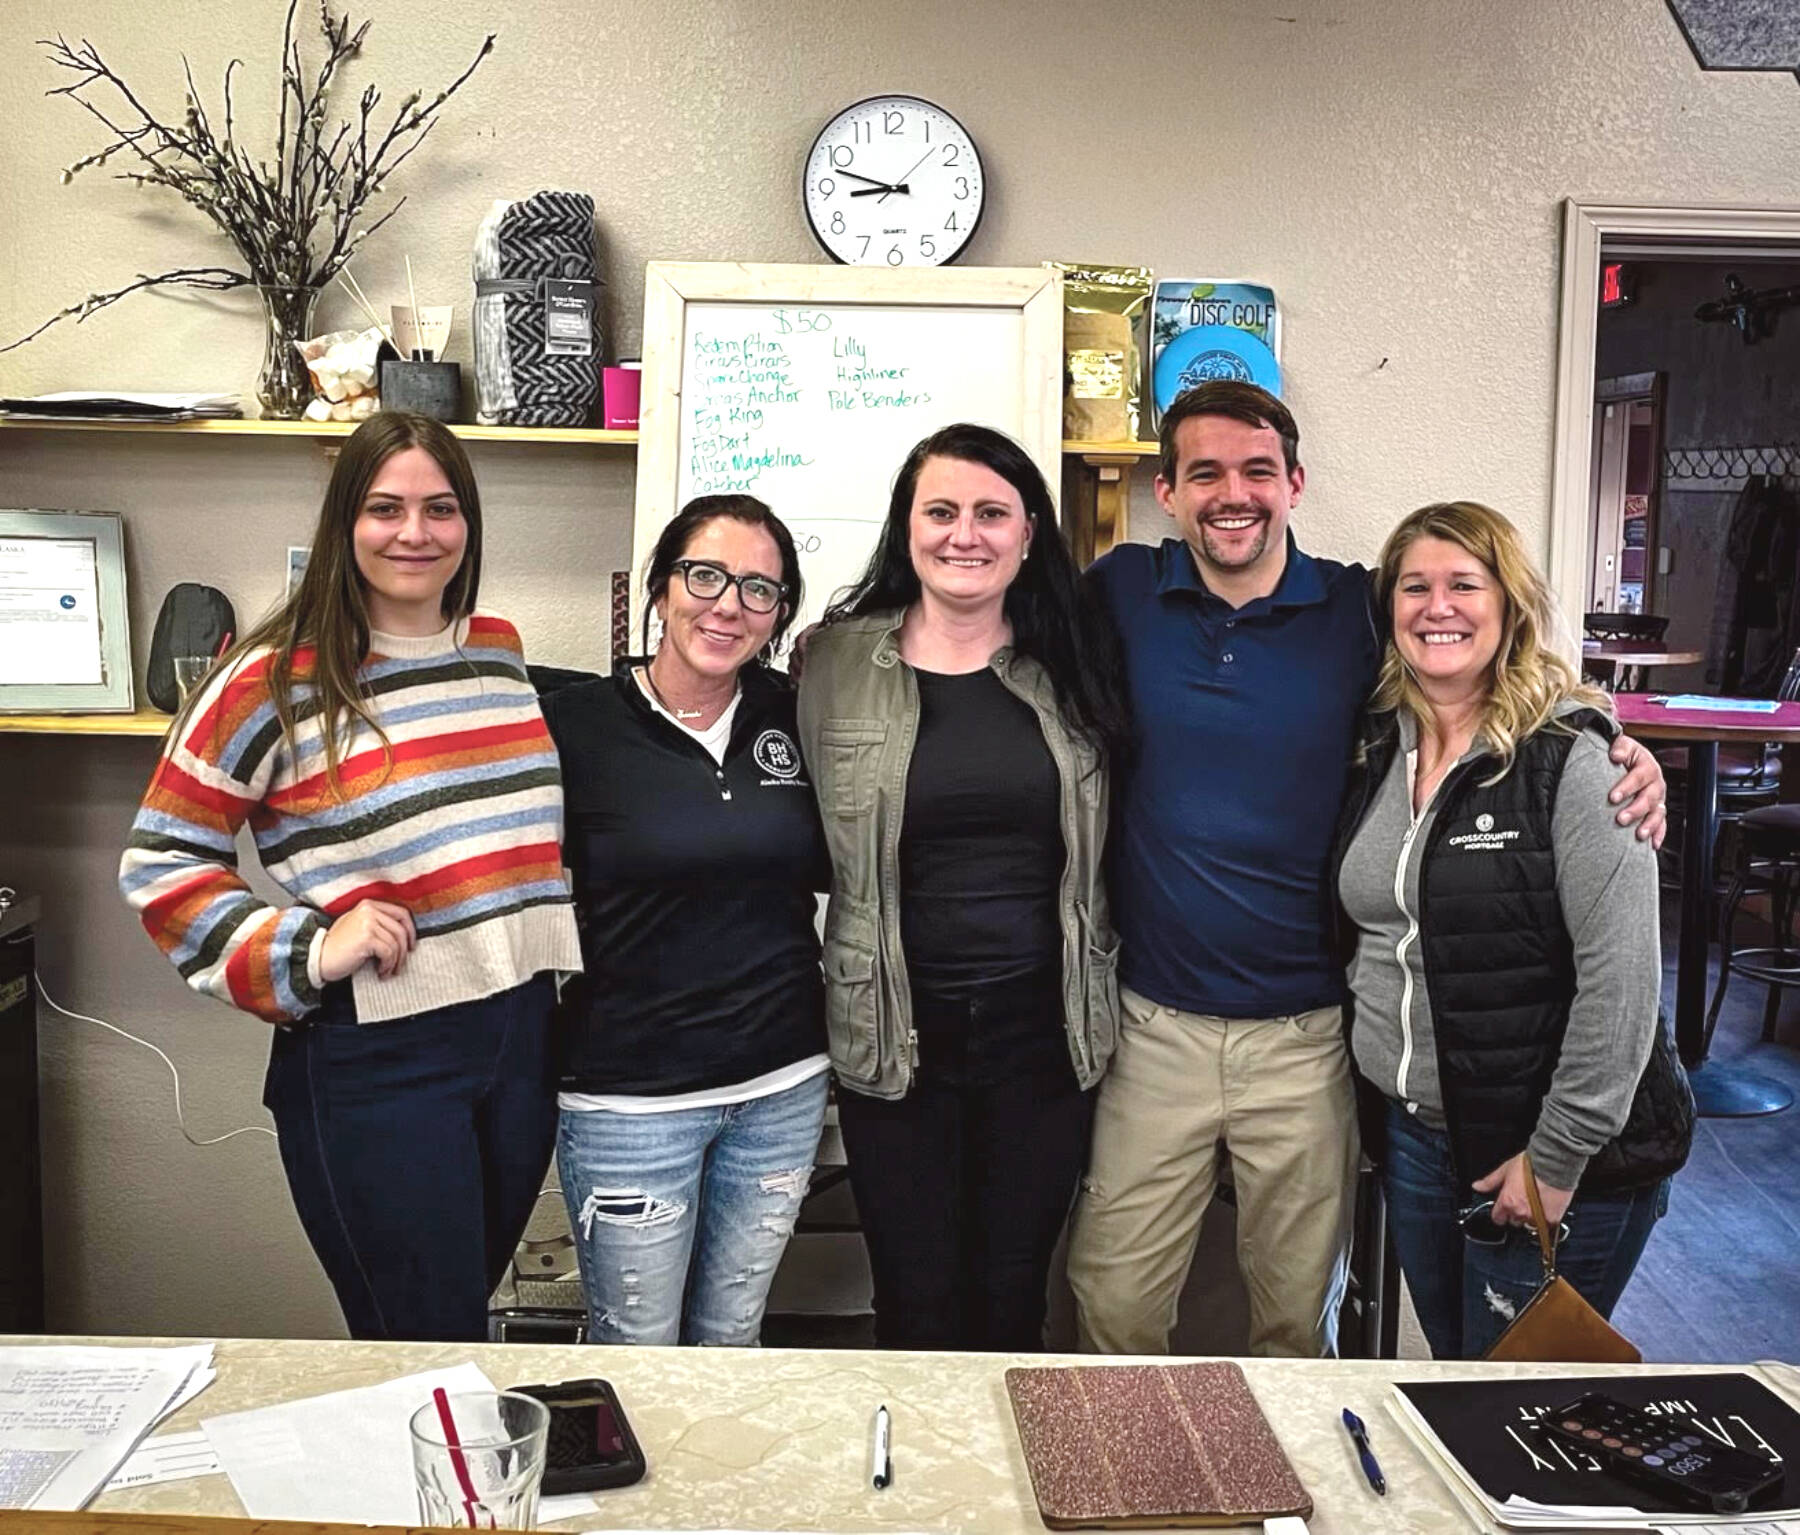 Anchor Point Chamber of Commerce boardmembers celebrate another successful year for the Anchor Point King Salmon Tournament on Saturday, May 6 at the VFW Post 10221 in Anchor Point, Alaska. Pictured left to right: Mcki Needham, Sarah Beller, Erin Jerde, Dawson Slaughter, Shannon Palmer. Photo courtesy of Mcki Needham